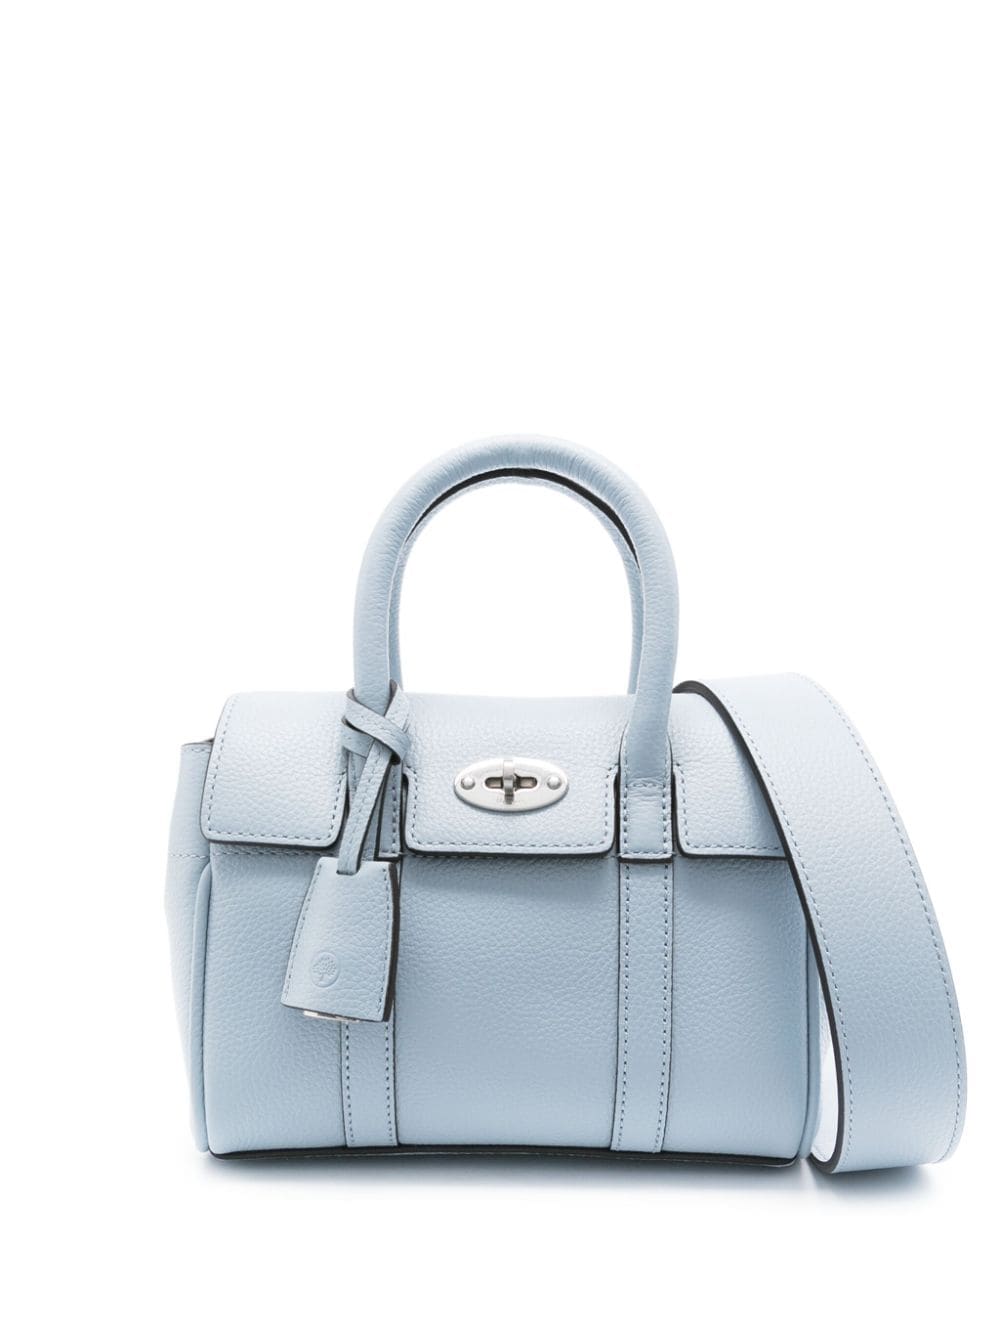 Mulberry Bayswater leather tote bag - Blue von Mulberry